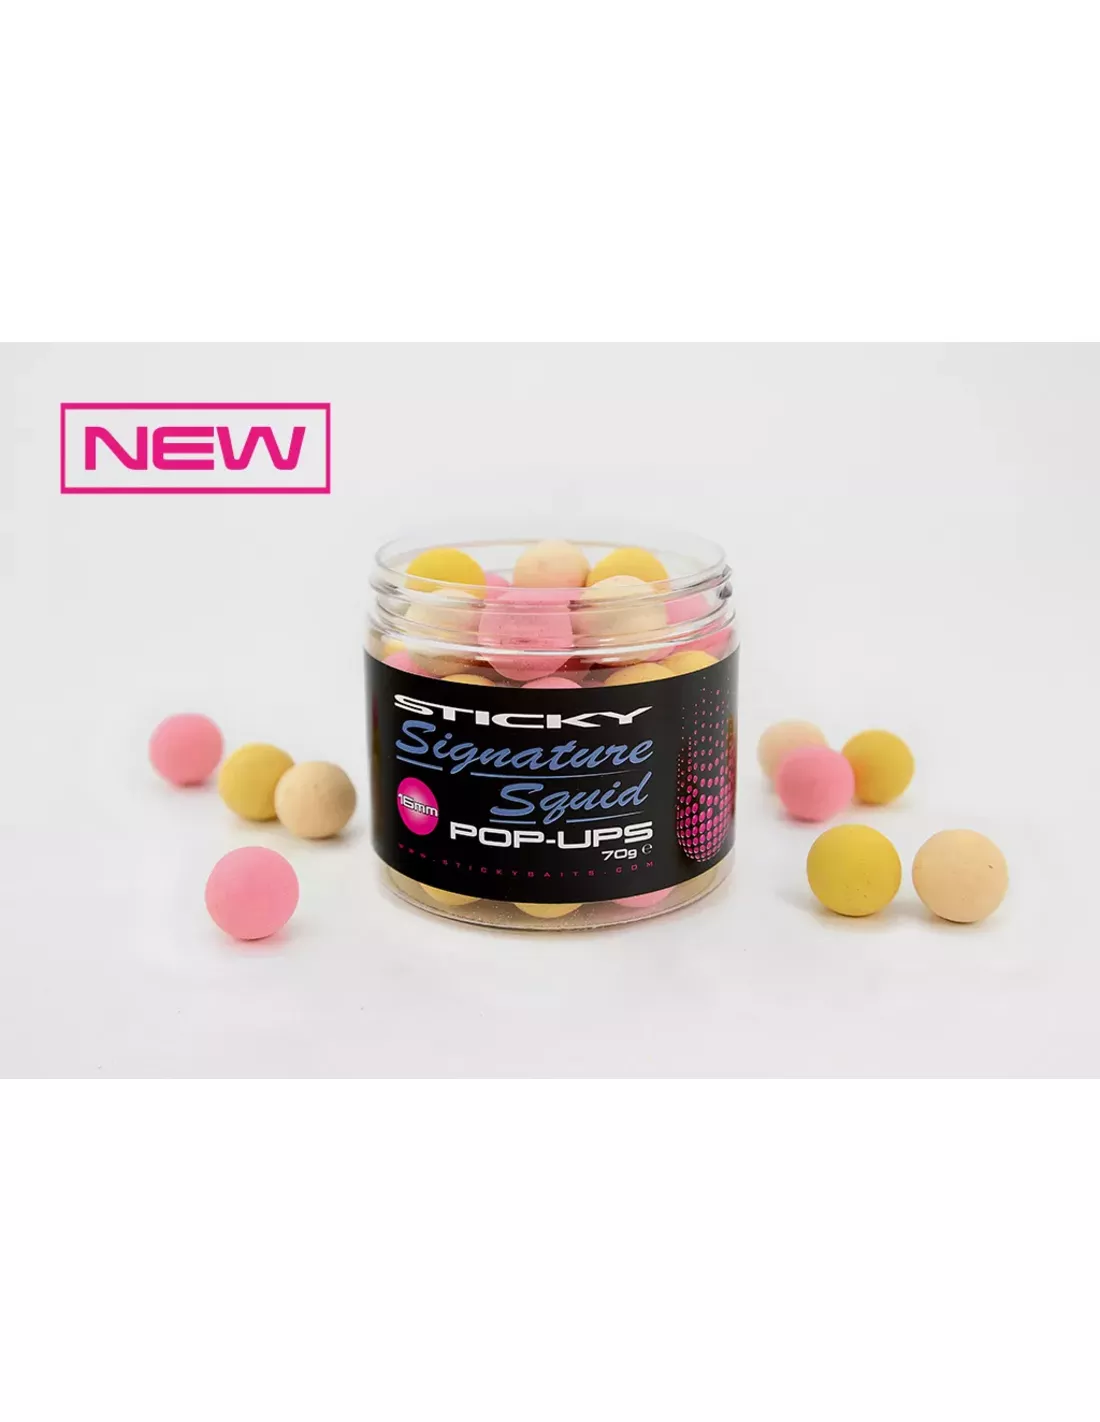 Sticky Baits Signature SQUID Wafters Mixed Colours ALL VARIETIES Carp Fishing 